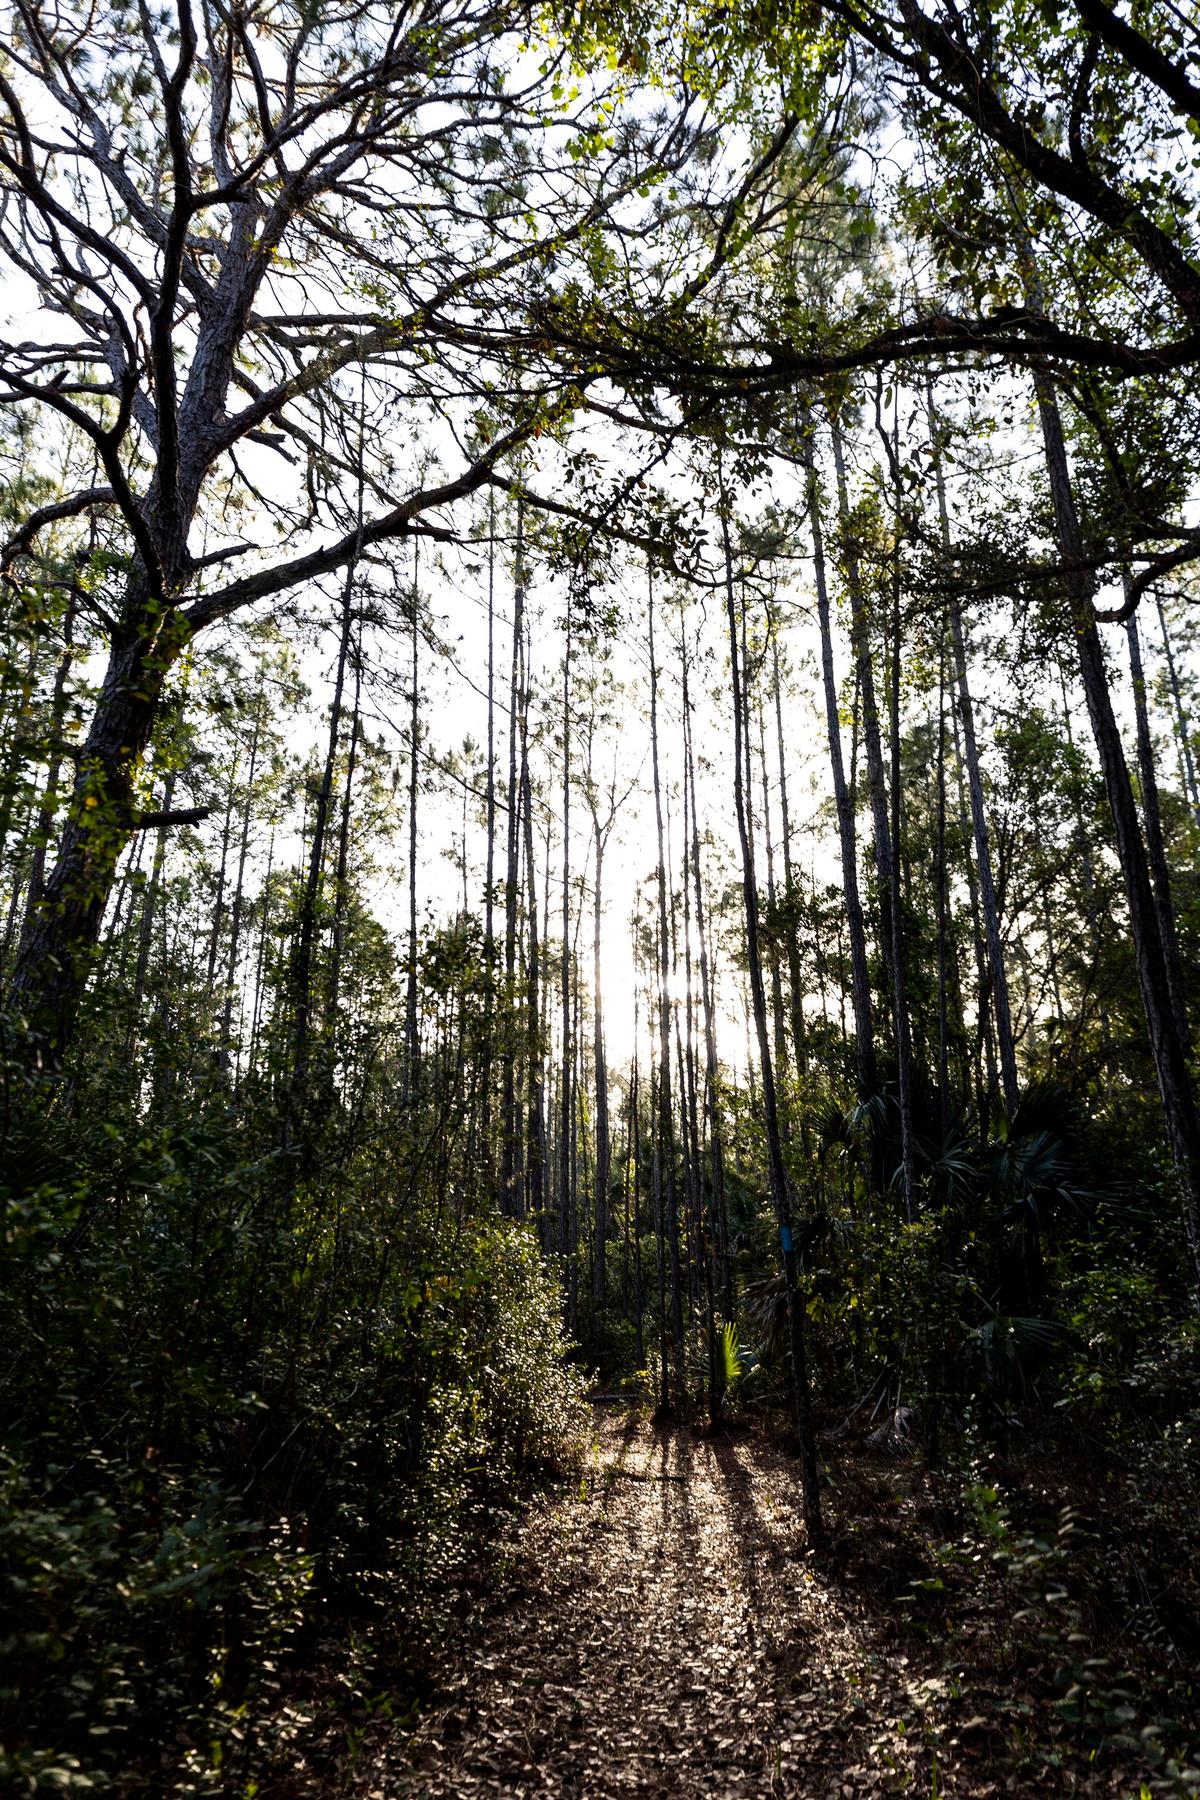 In this March 22, 2023 photo, Charles H. Bronson State Forest offers miles of hiking trails and thousands of acres of conservation land east of Orlando, Florida. (Patrick Connolly/Orlando Sentinel/TNS)